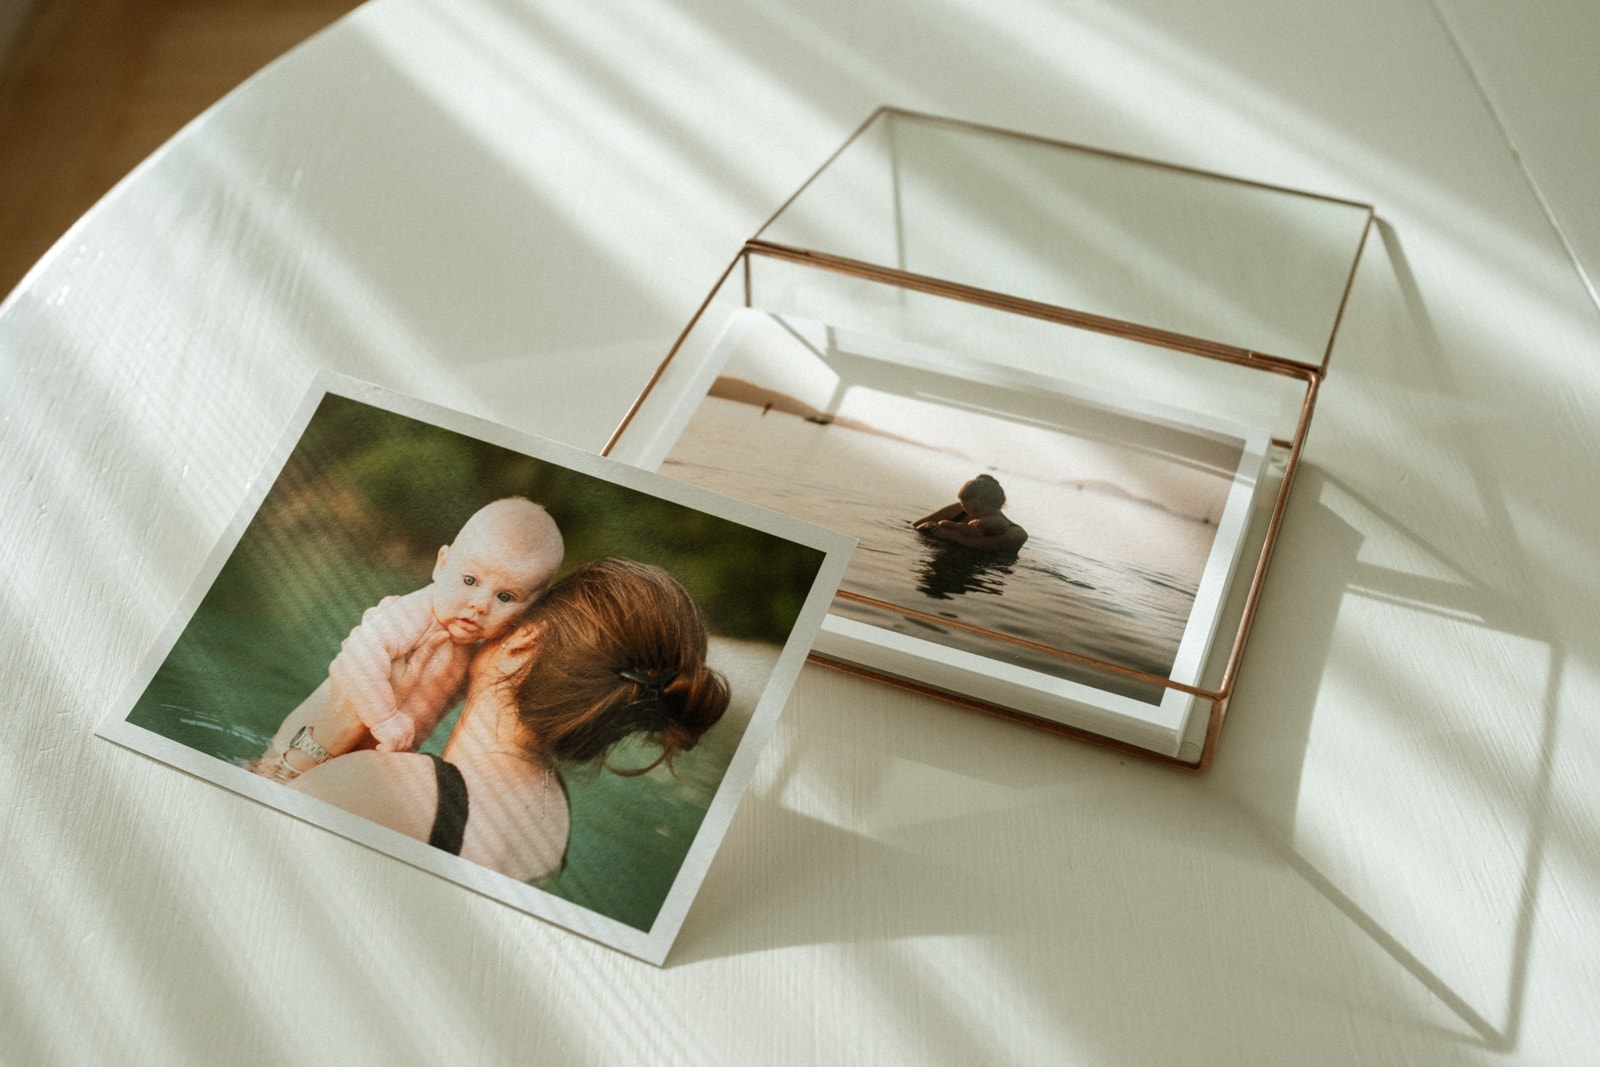 Photo print of mother and baby rests on glass photo box.